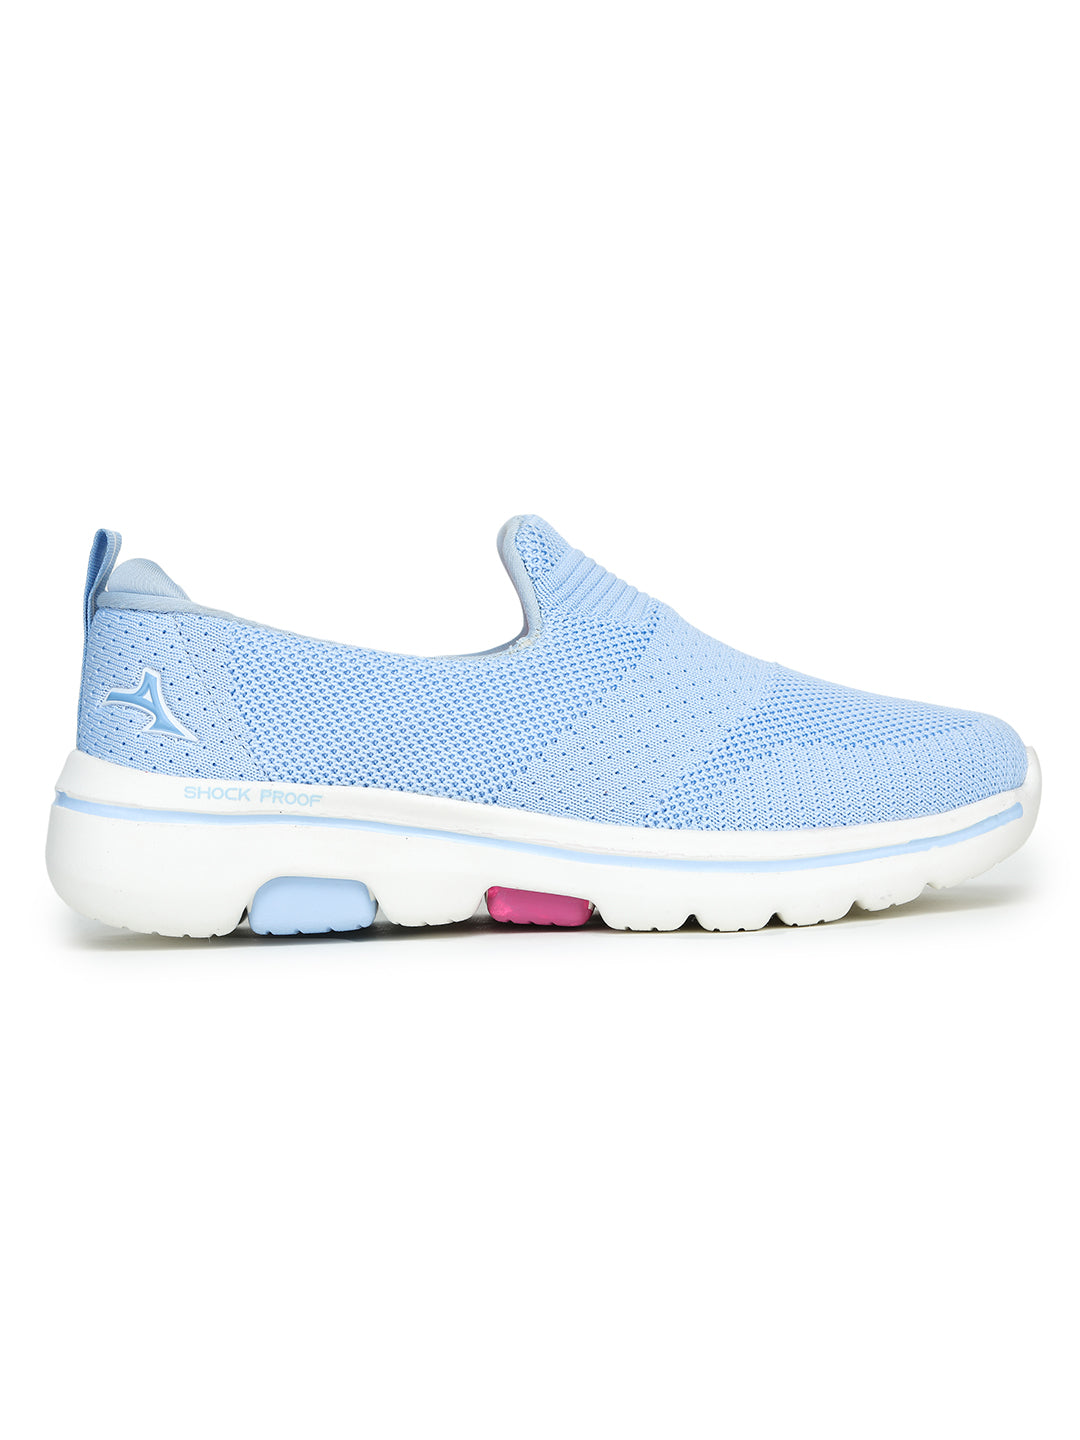 ABROS VICTORIA SPORTS SHOES FOR WOMEN